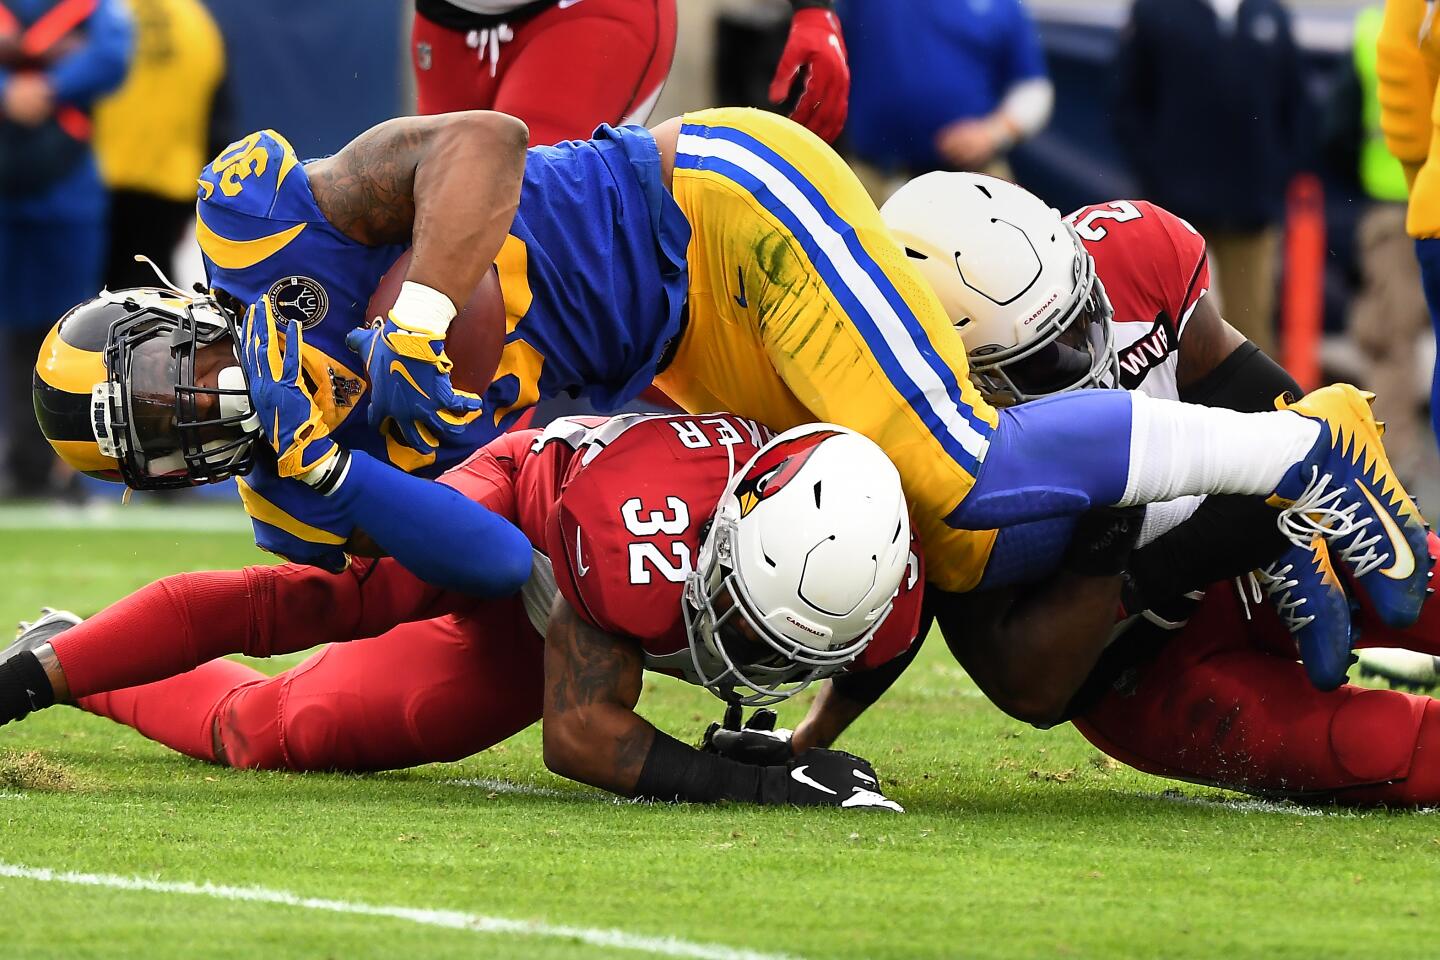 Rams running back Todd Gurley is stopped short of the goal line by Arizona Cardinals safety Budda Baker (32) and cornerback Patrick Peterson during the second quarter.